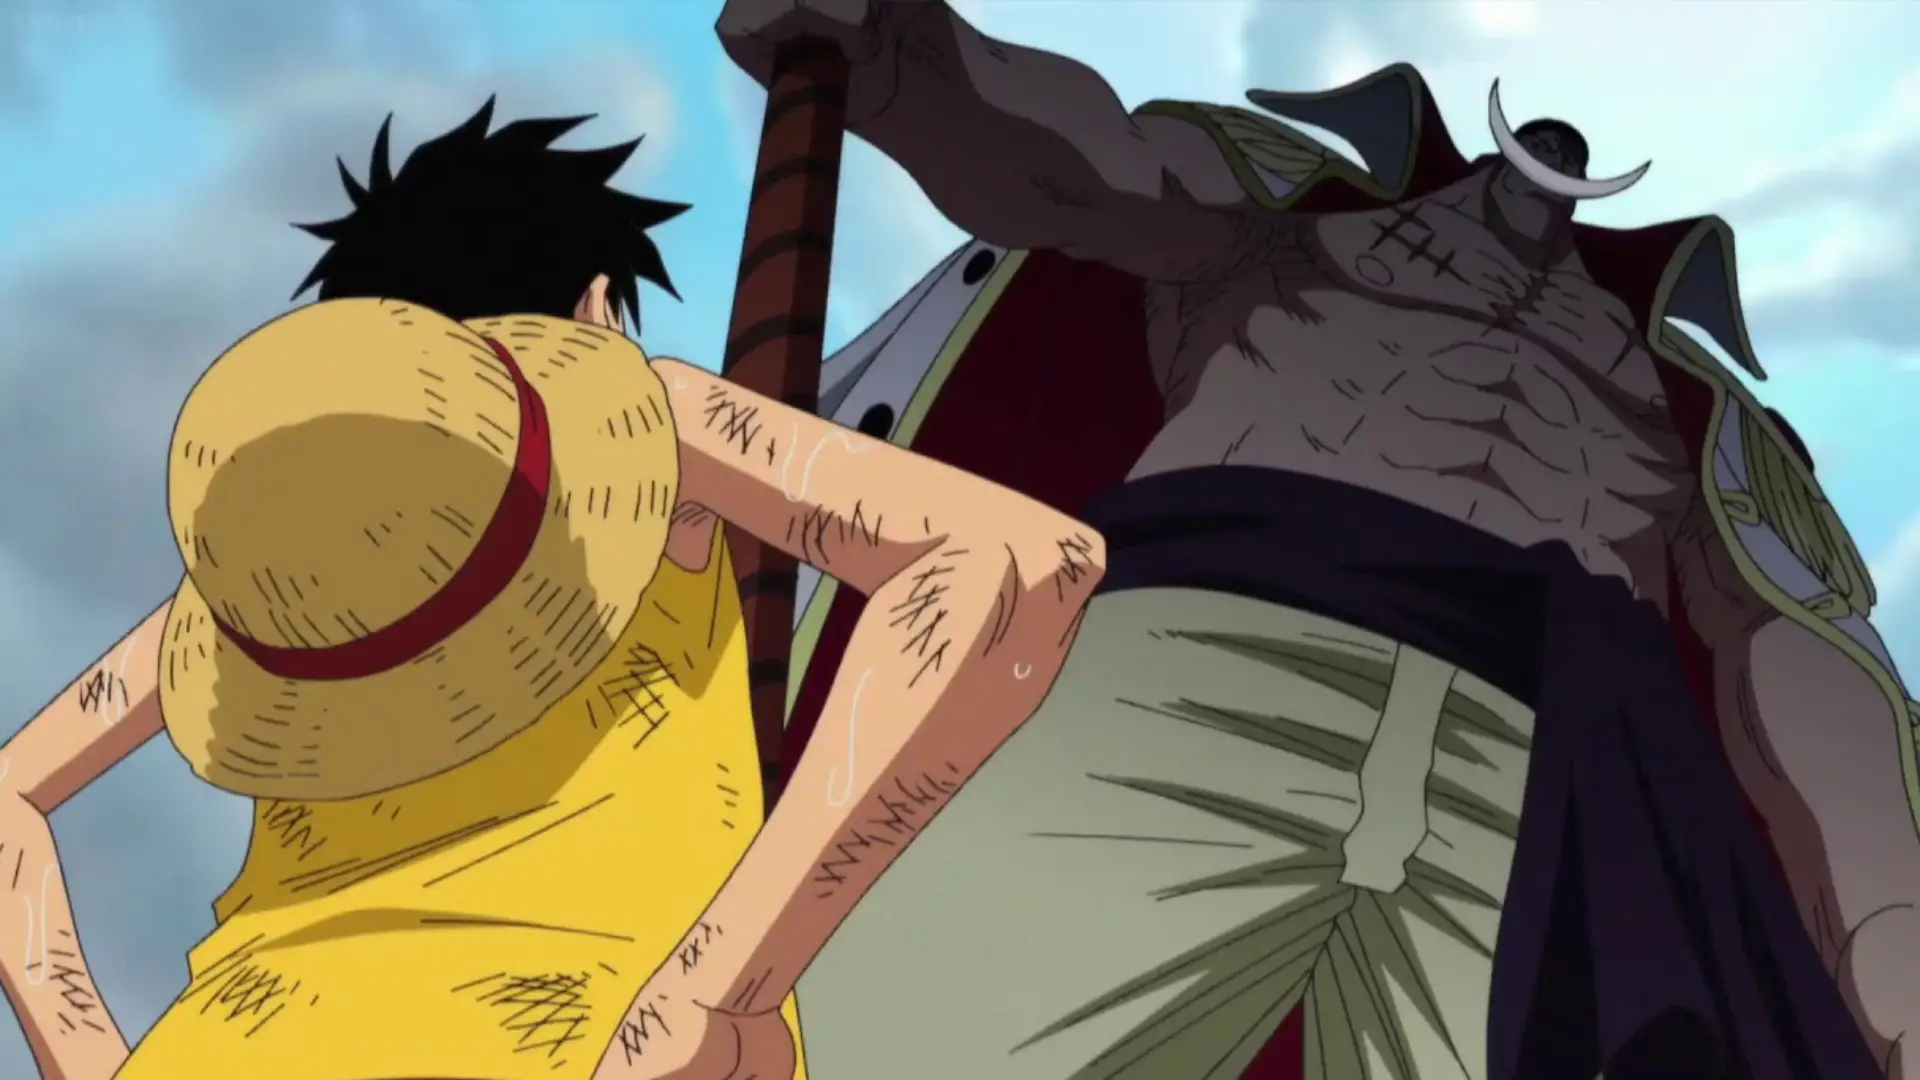 What else could Whitebeards Gura Gura no Mi Fruit do? What are its